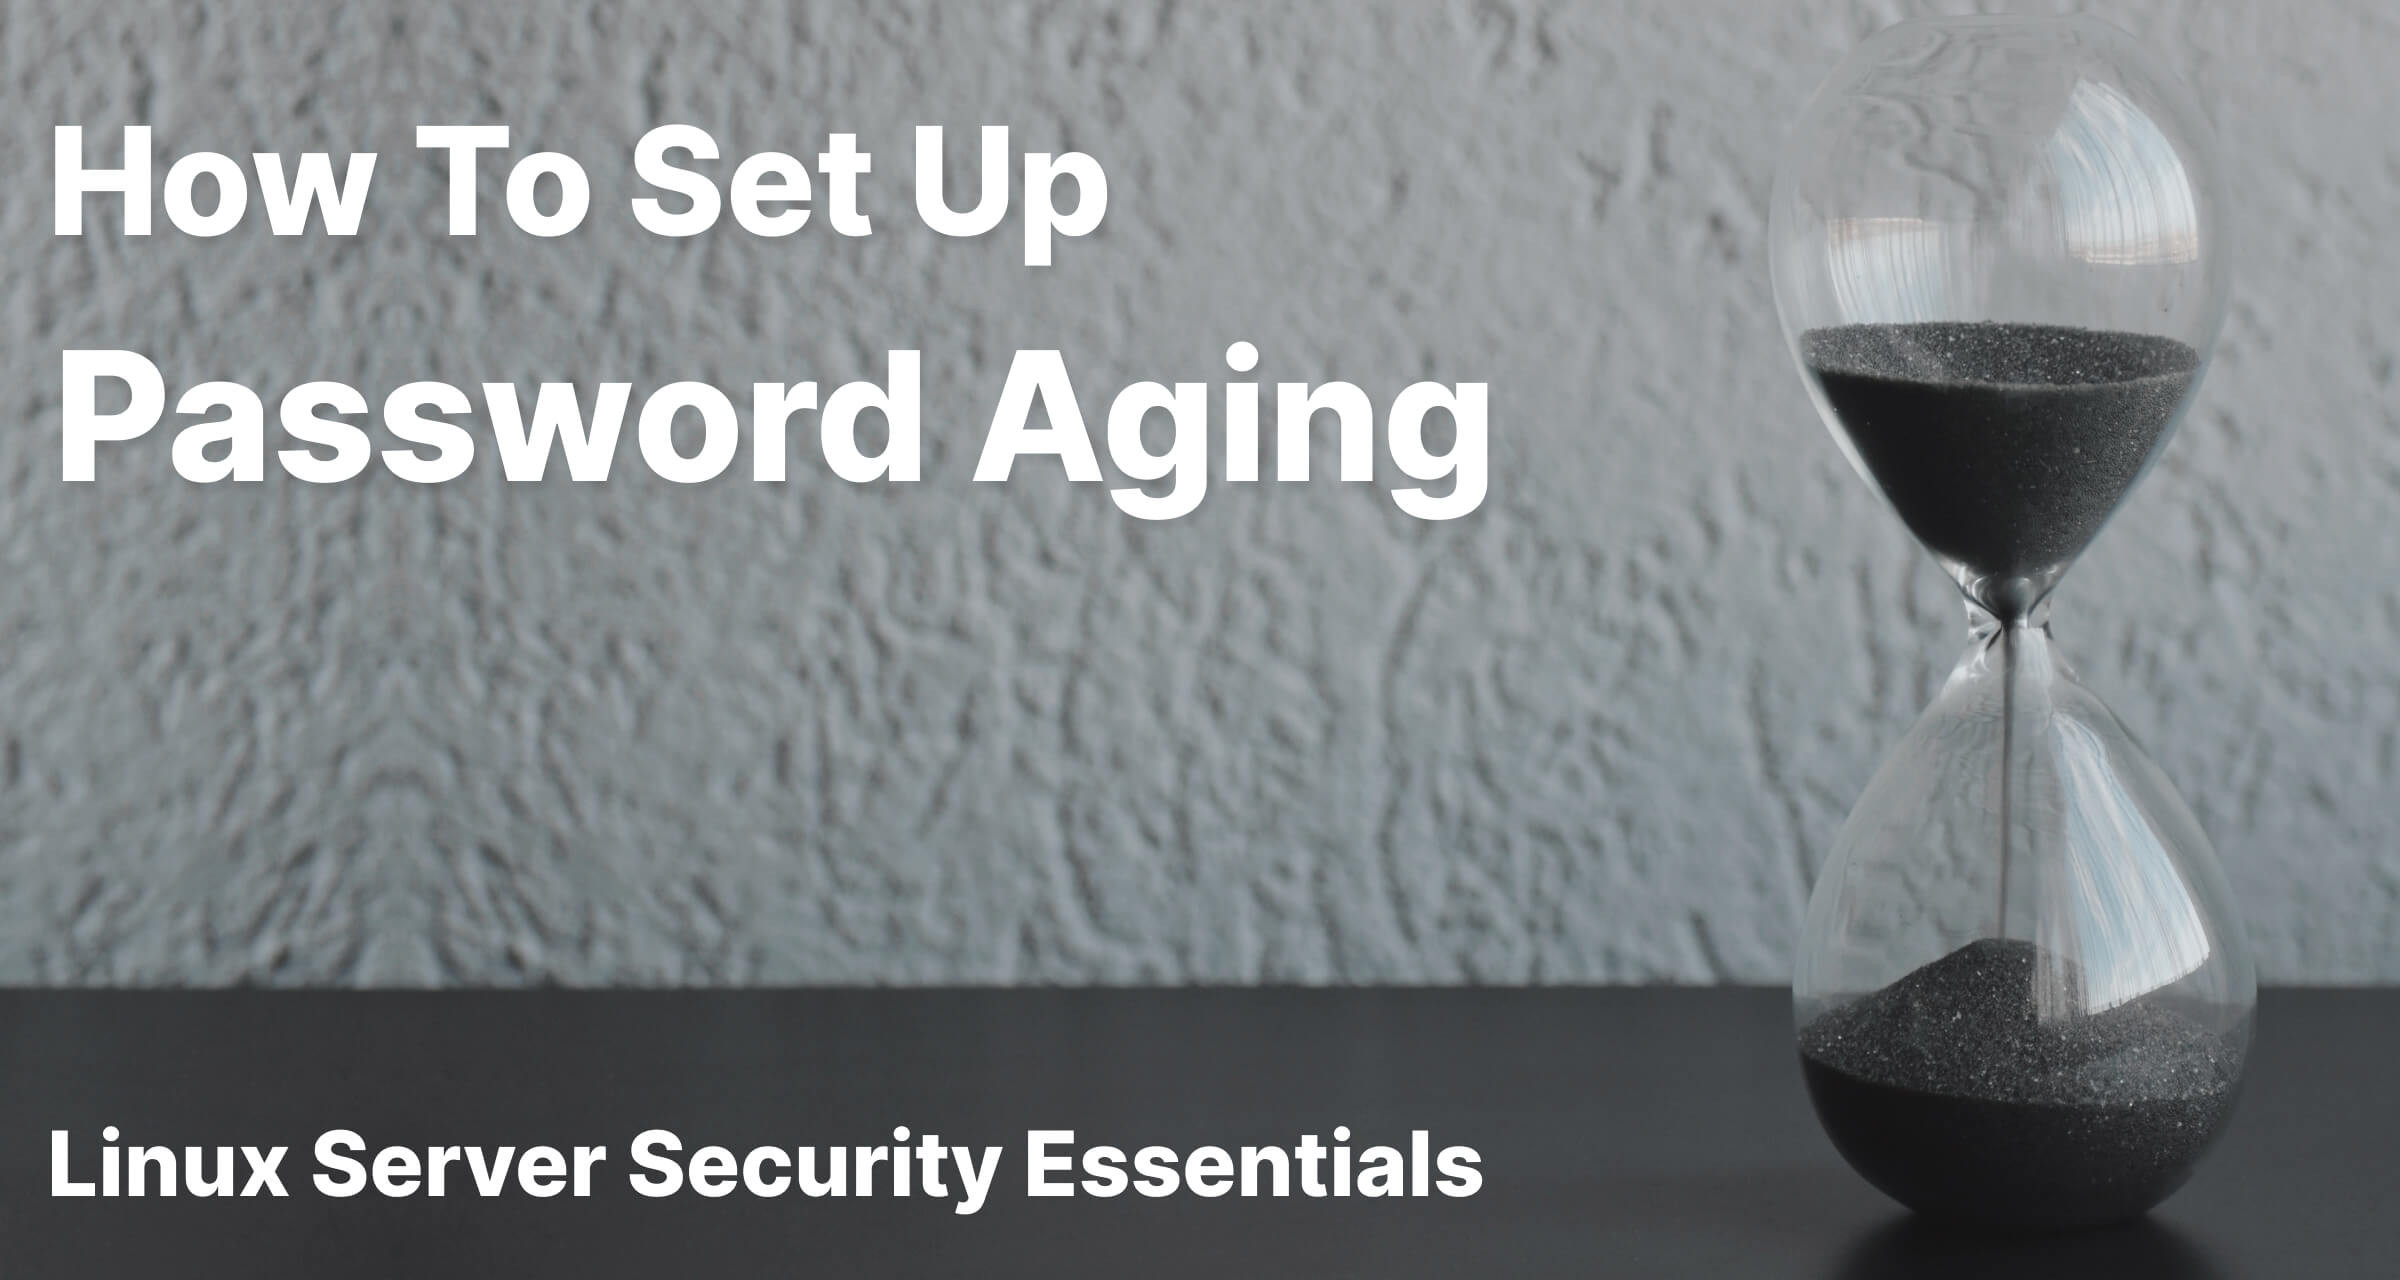 How to set up password aging on Linux